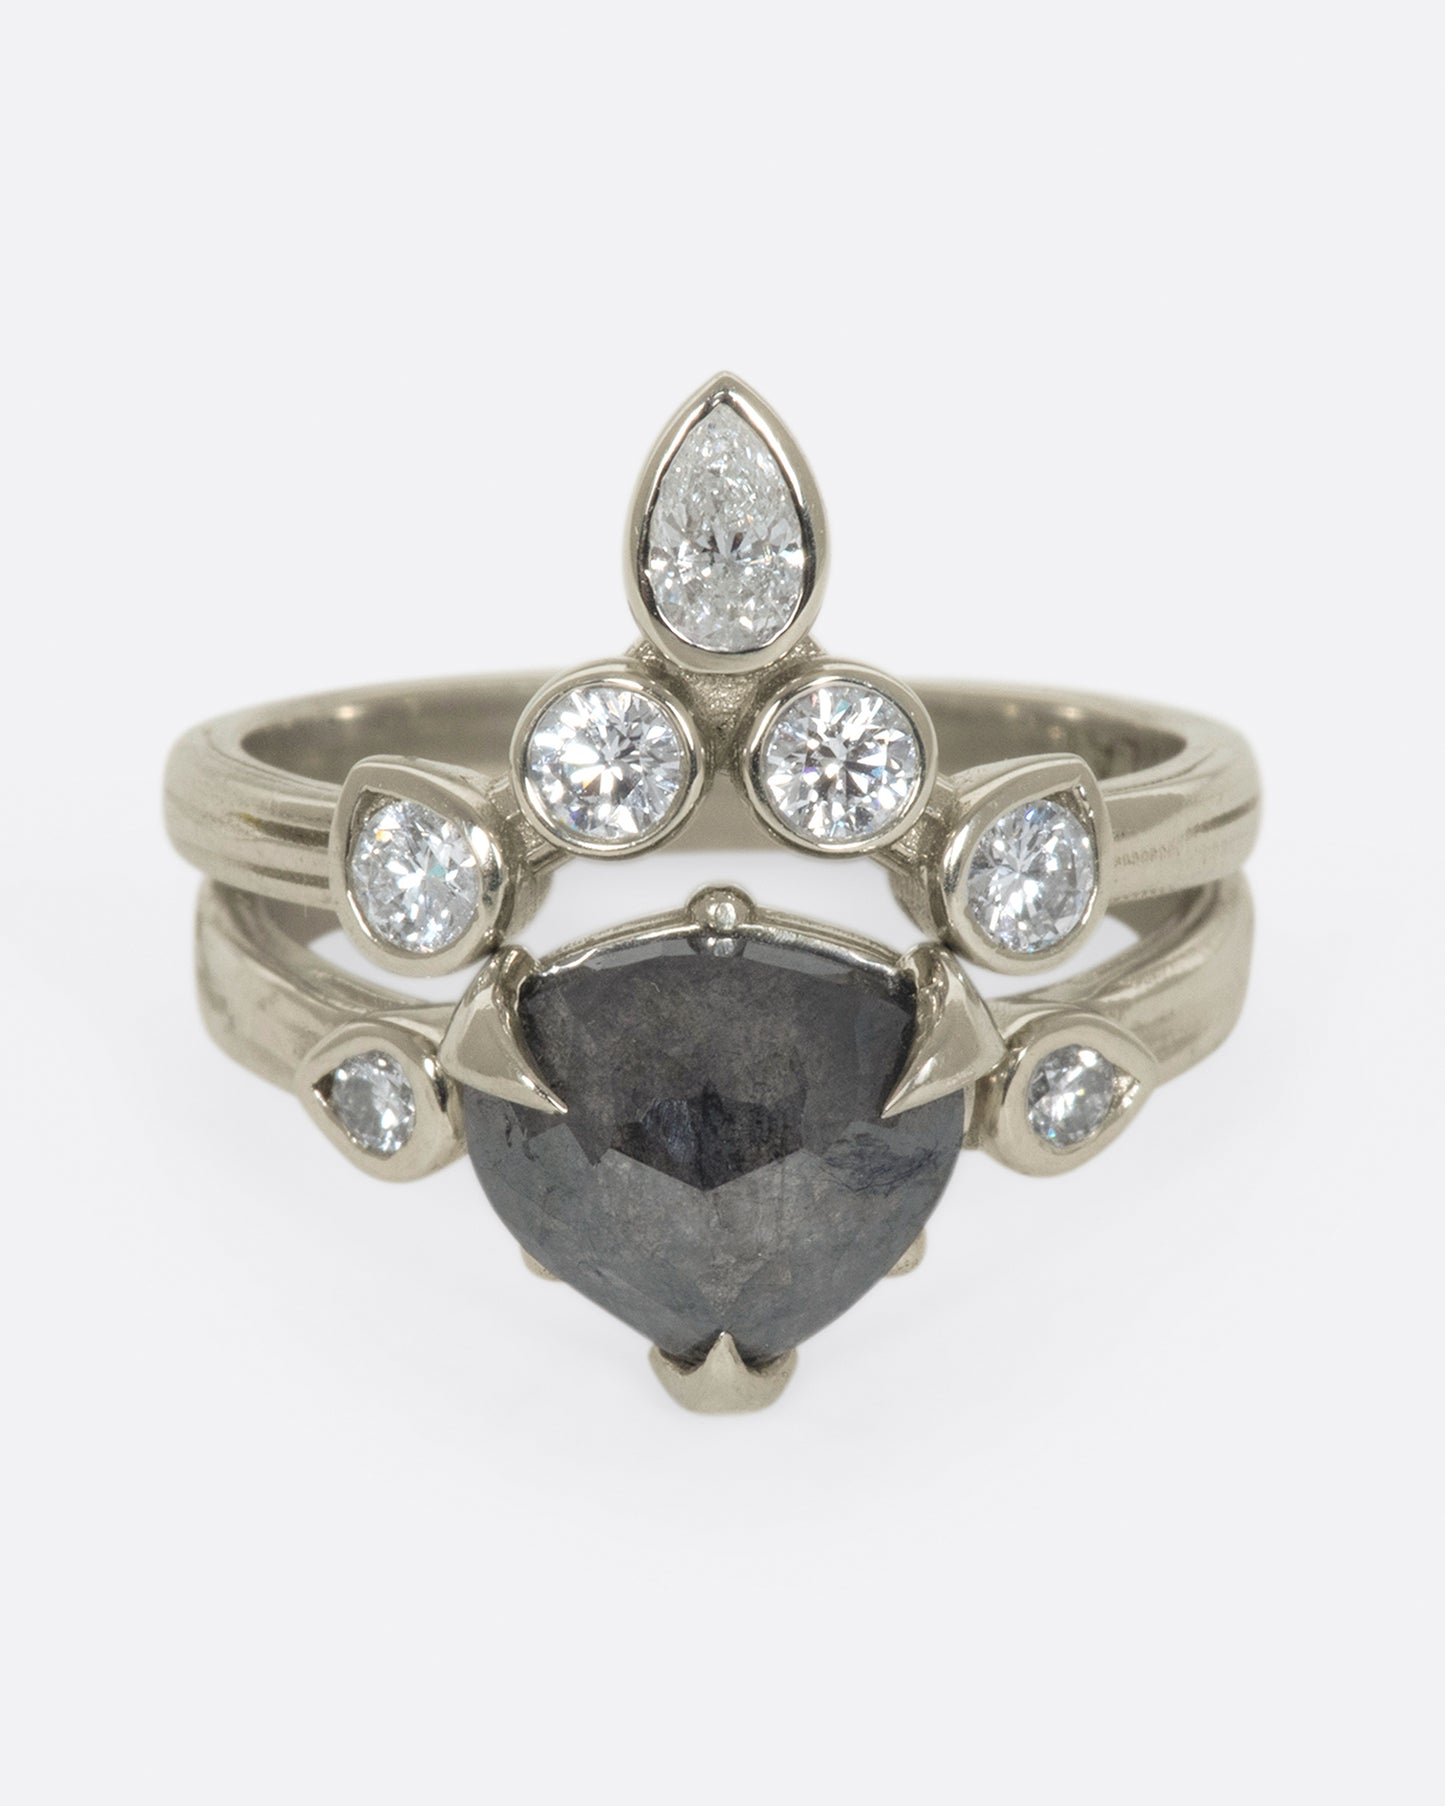 This crowning design can be worn in either direction on the finger, alone, or stacked with another one of Karen's creations - We love it with one of her Invincible Heart rings